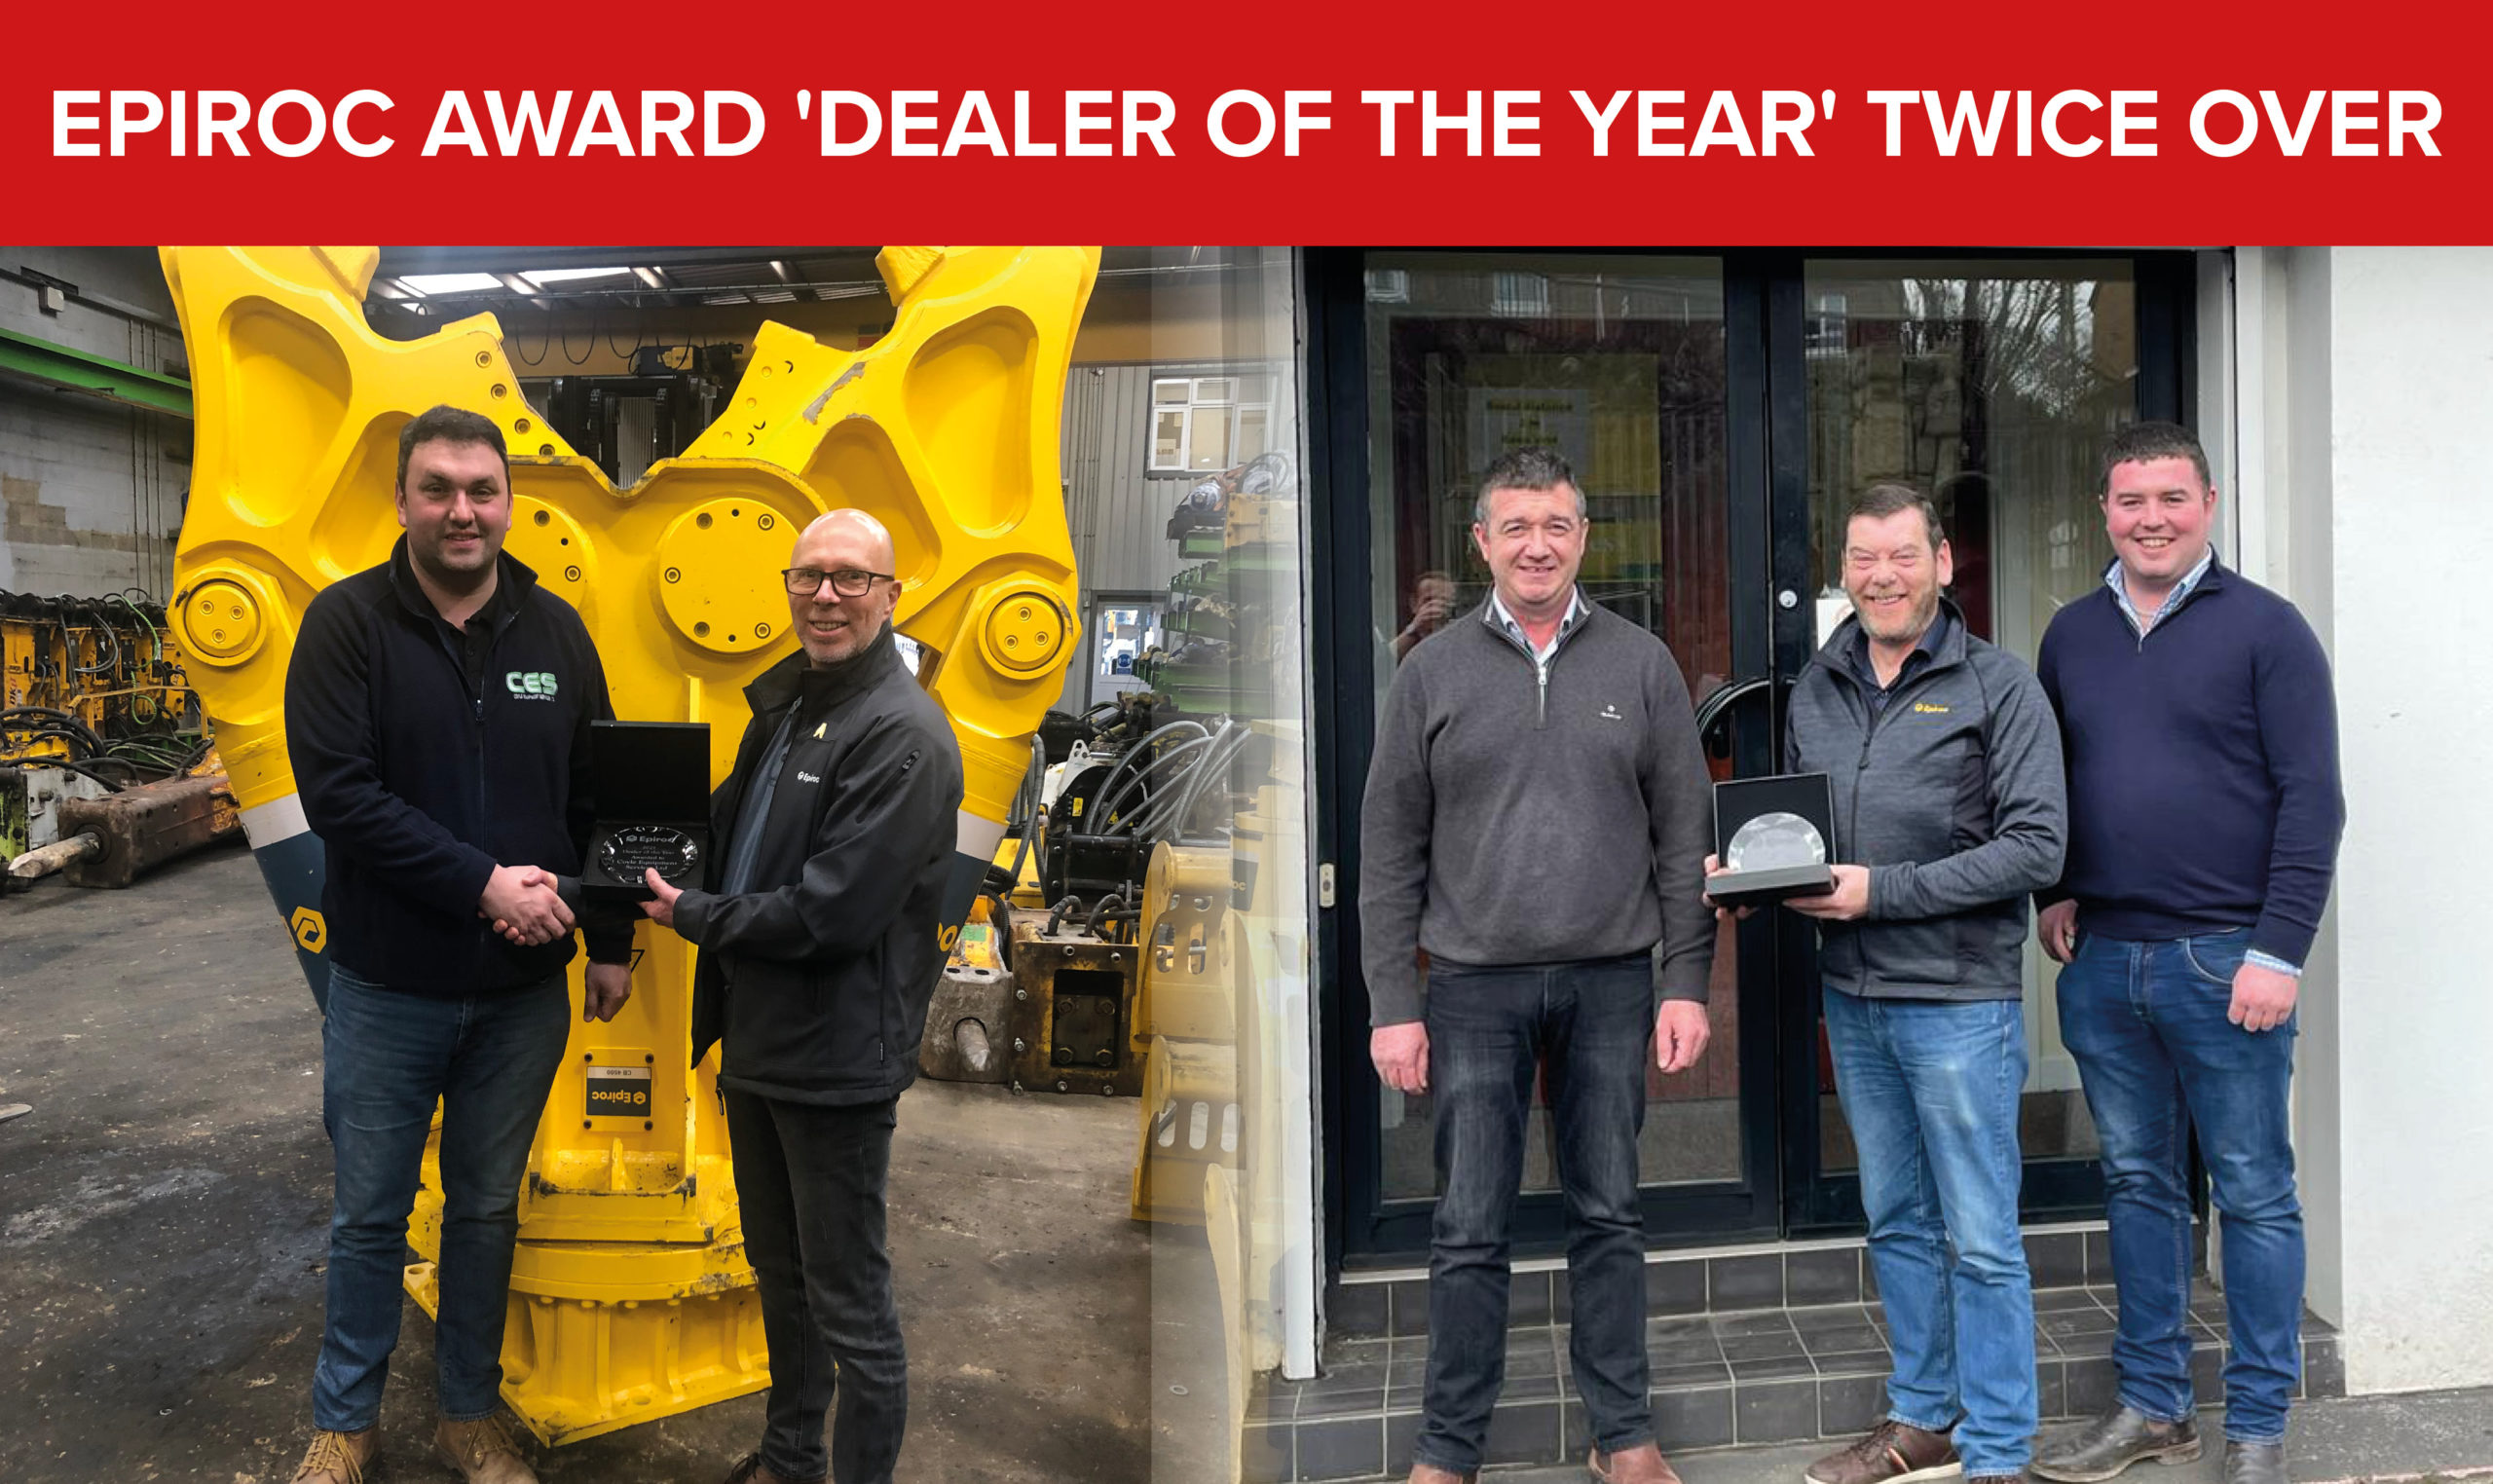 Great customer service earns two winners the 2021 Epiroc Dealer of the Year Award